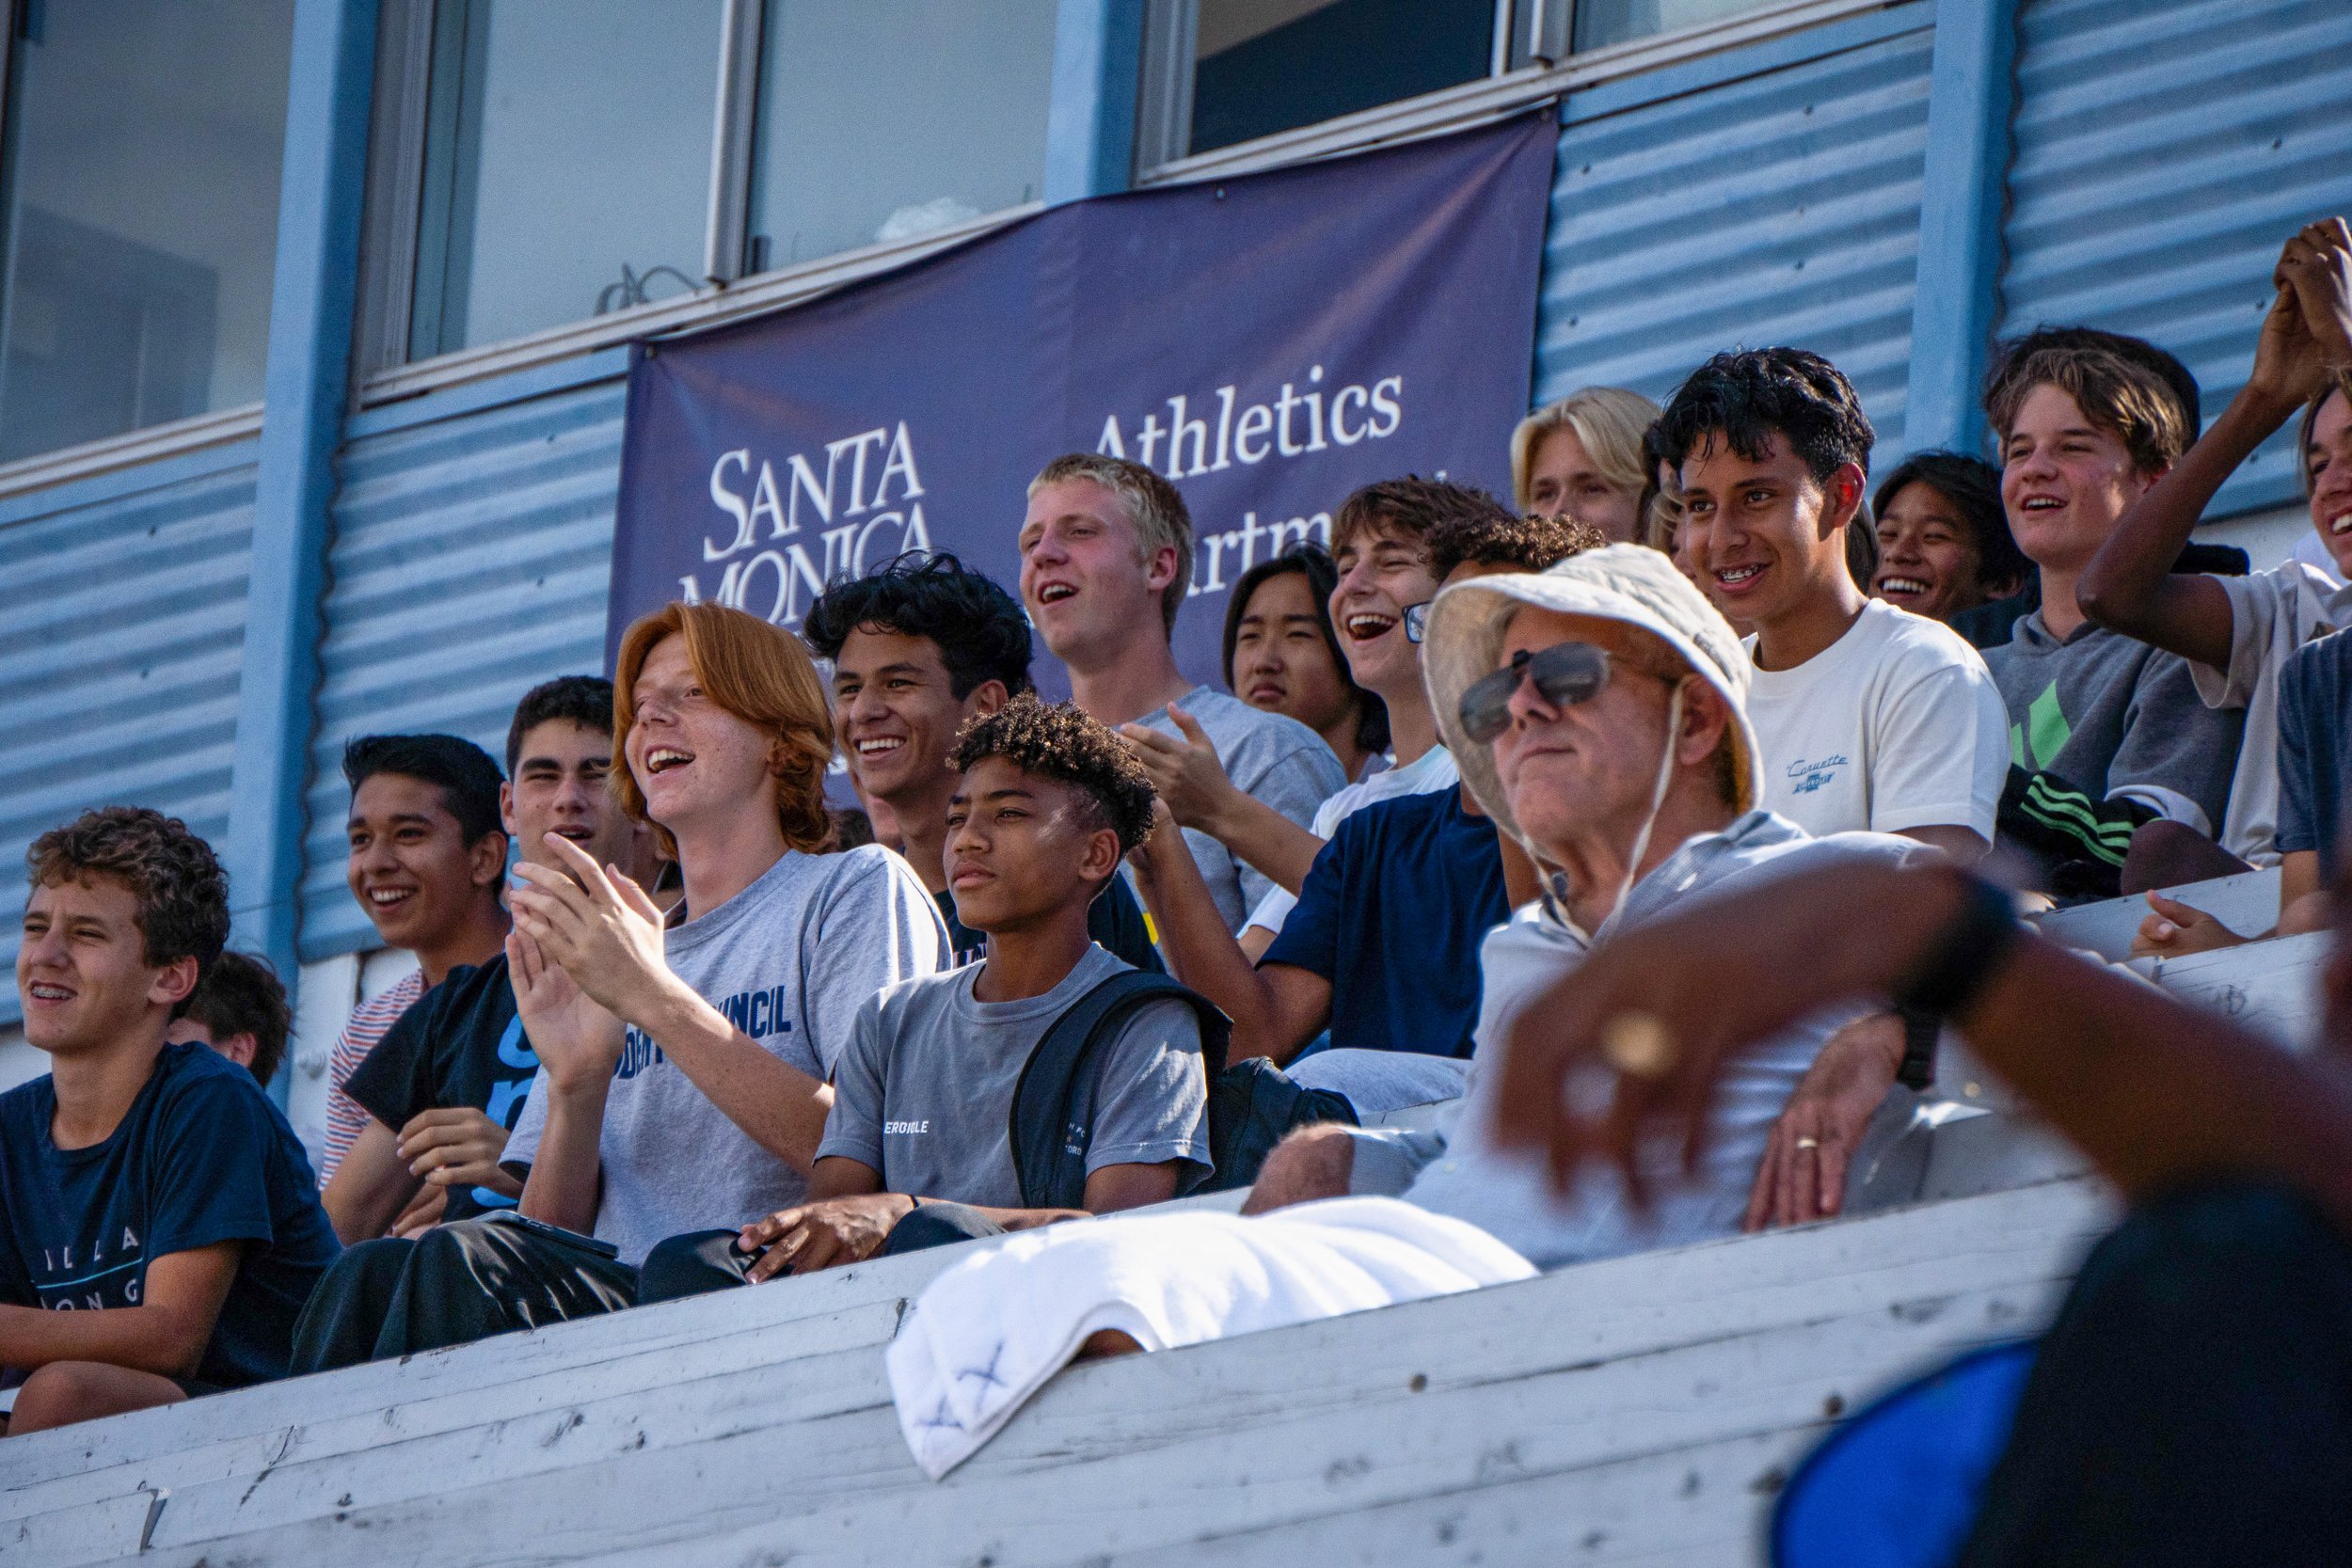  Supporters from above flood The Corsair Field stands with applause and shouts after The Corsairs score a goal.The Corsair Field in Santa Monica, Calif. On Friday, September 2, 2022. (Tsen Ee Lin | The Corsair) 